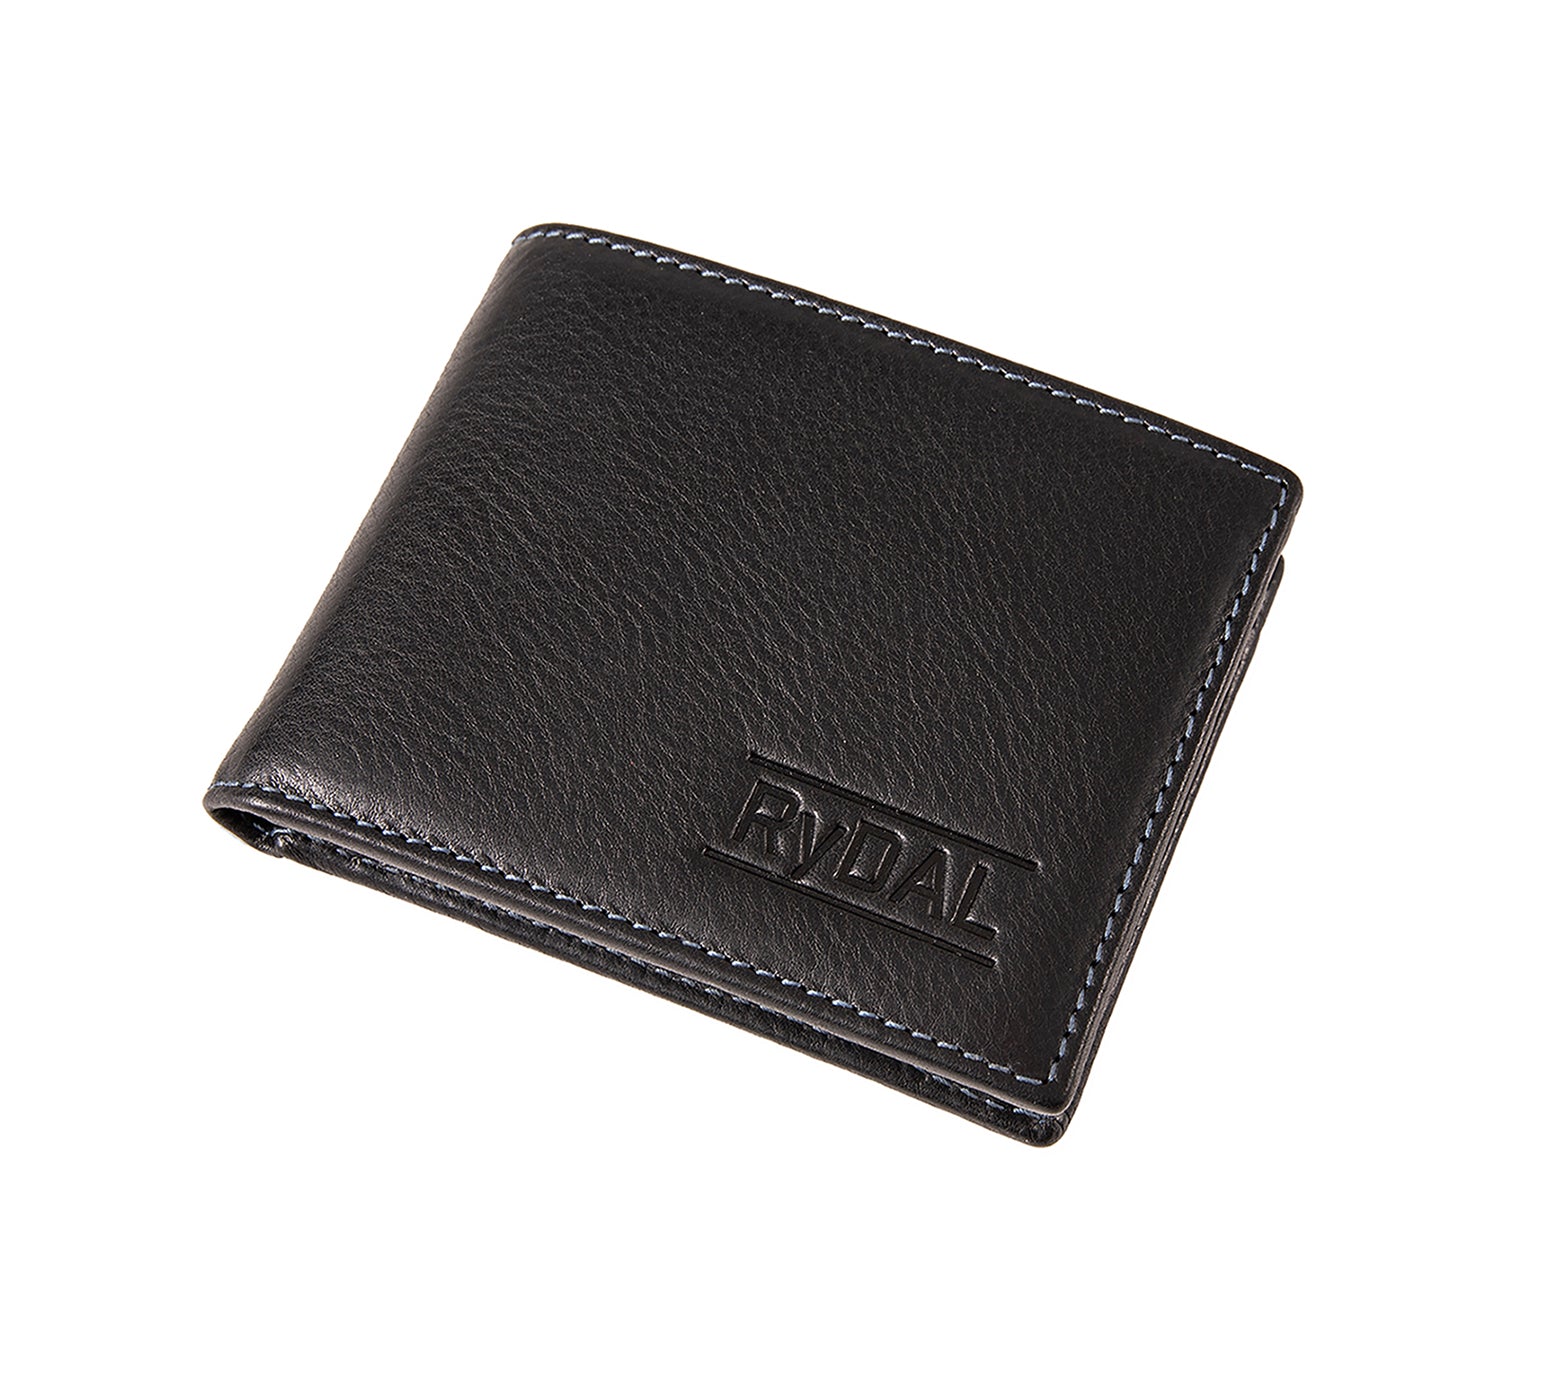 Mens Leather Wallet with Coin Pocket from Rydal in 'Black/Royal Blue' showing wallet closed.